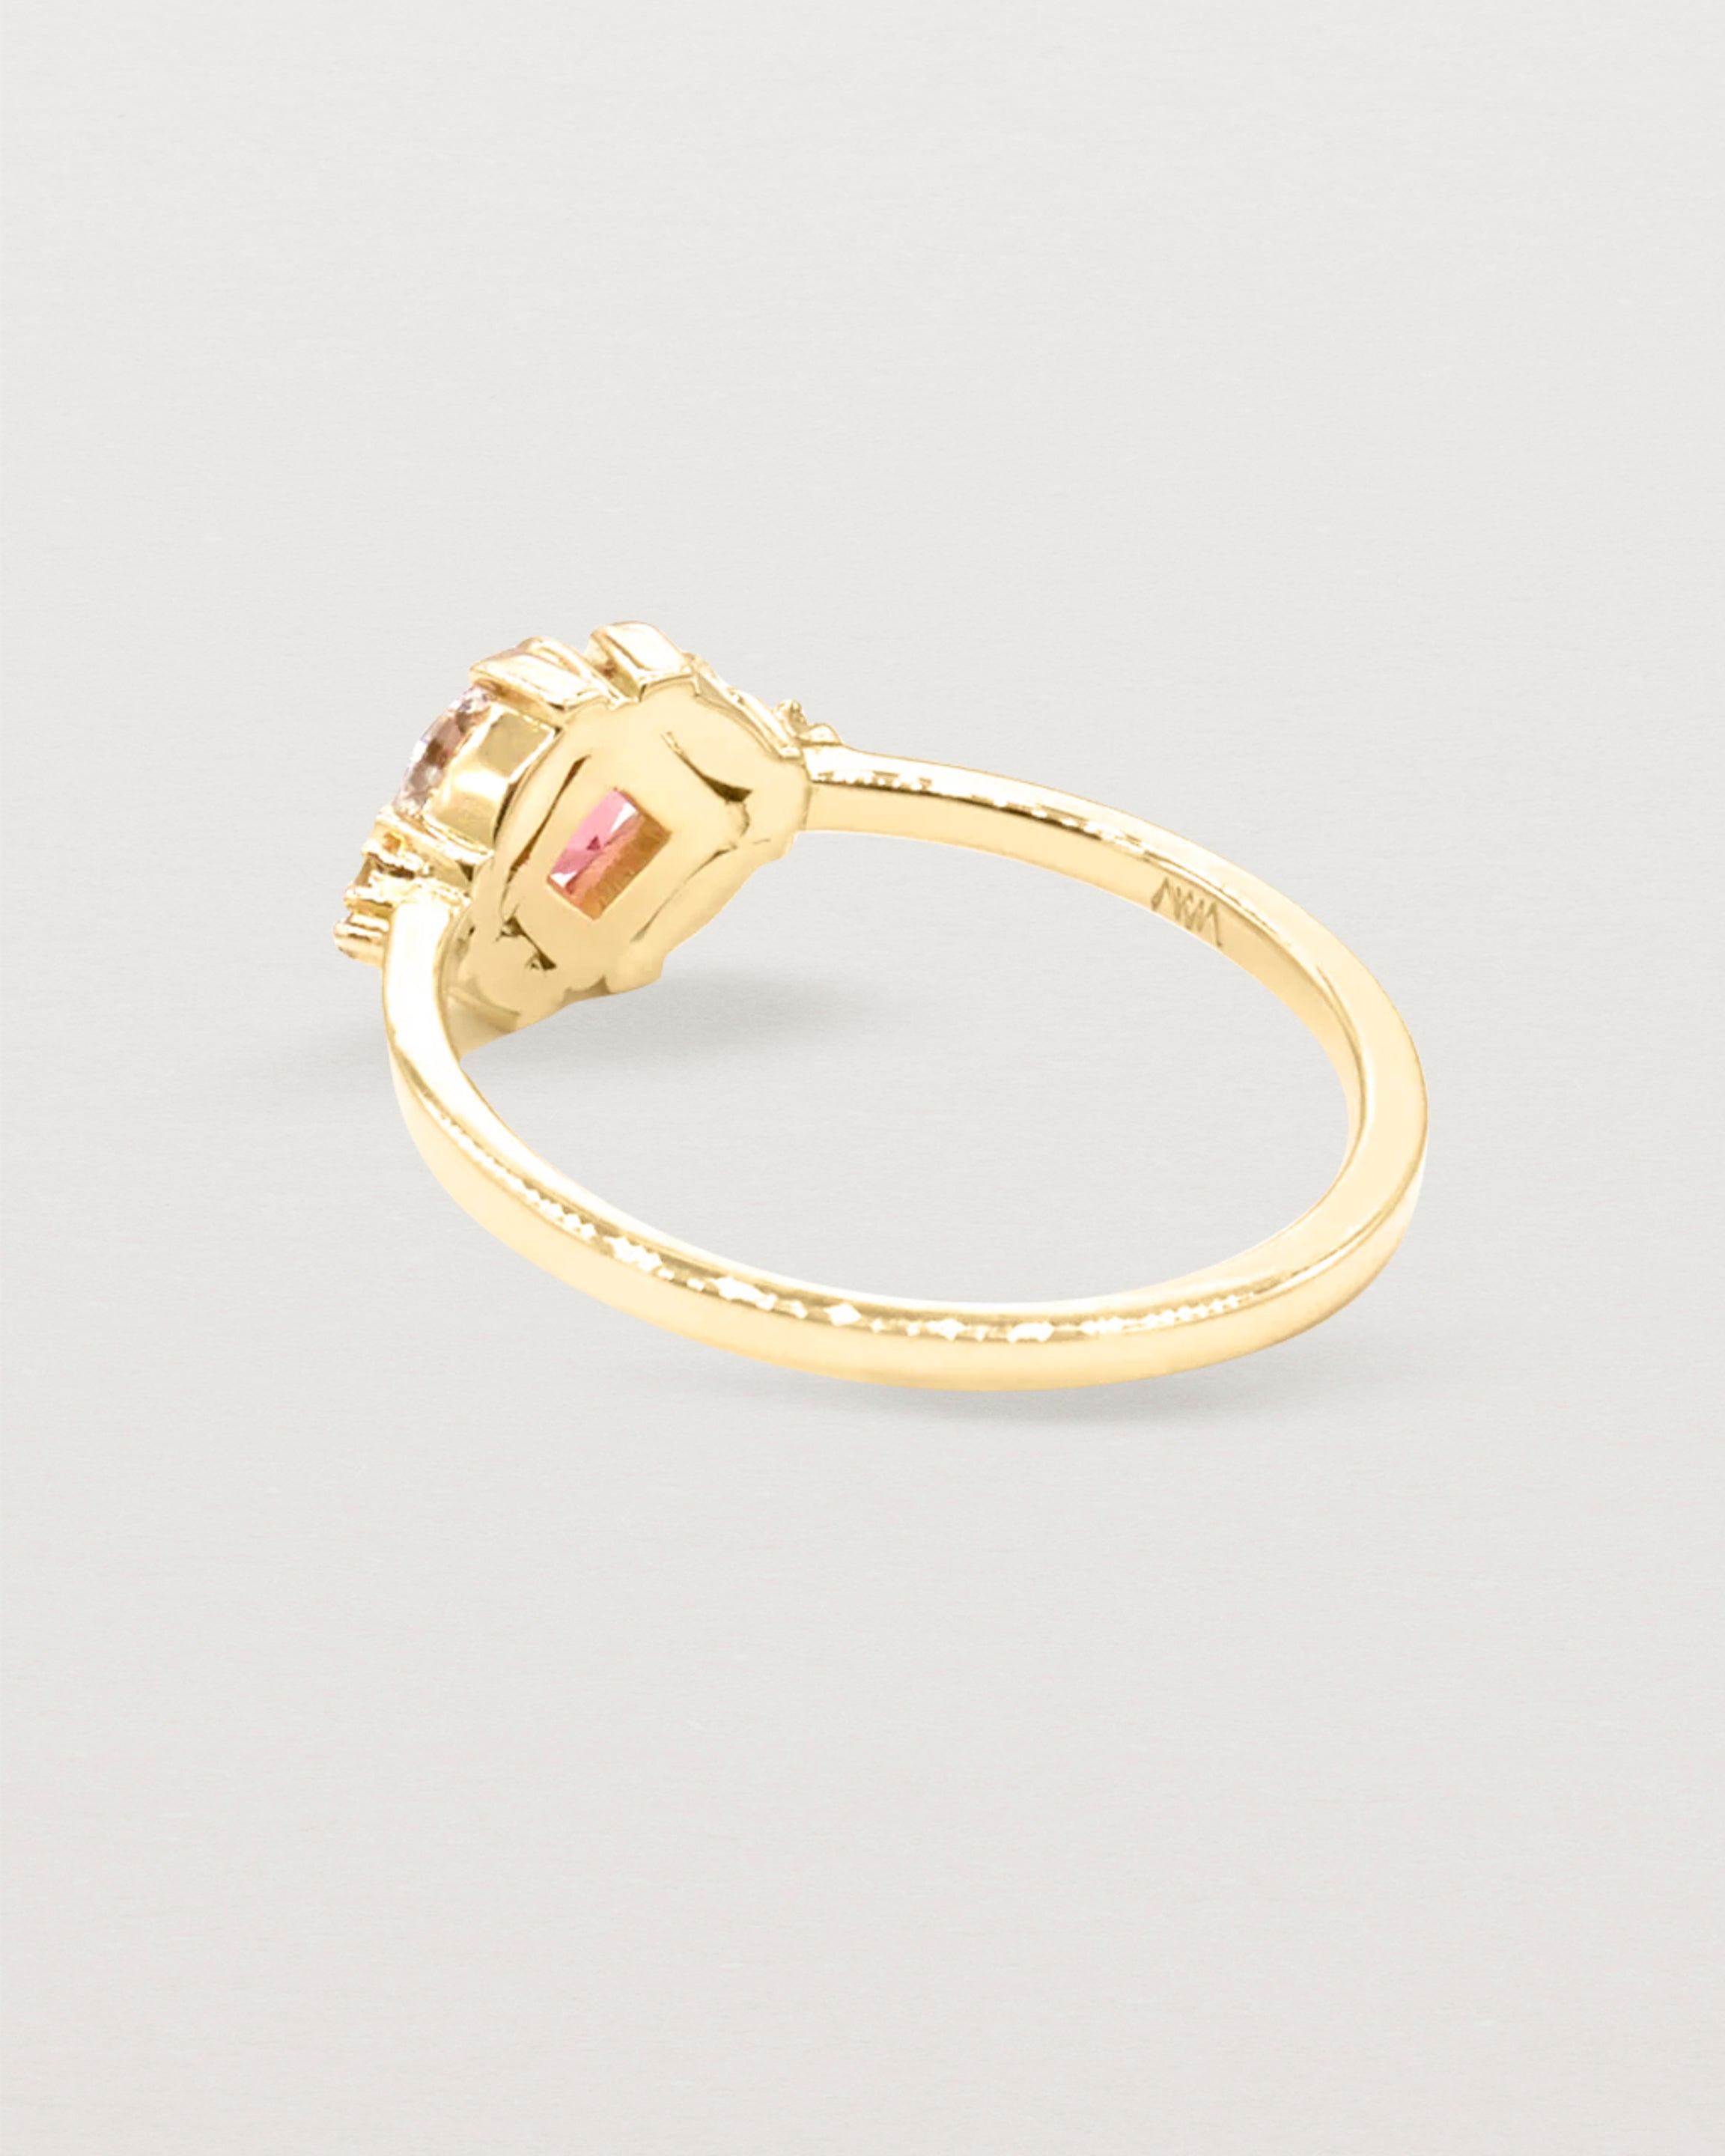 The back view of an asscher cut pink spinel is heroes by white diamond clusters set in yellow gold.